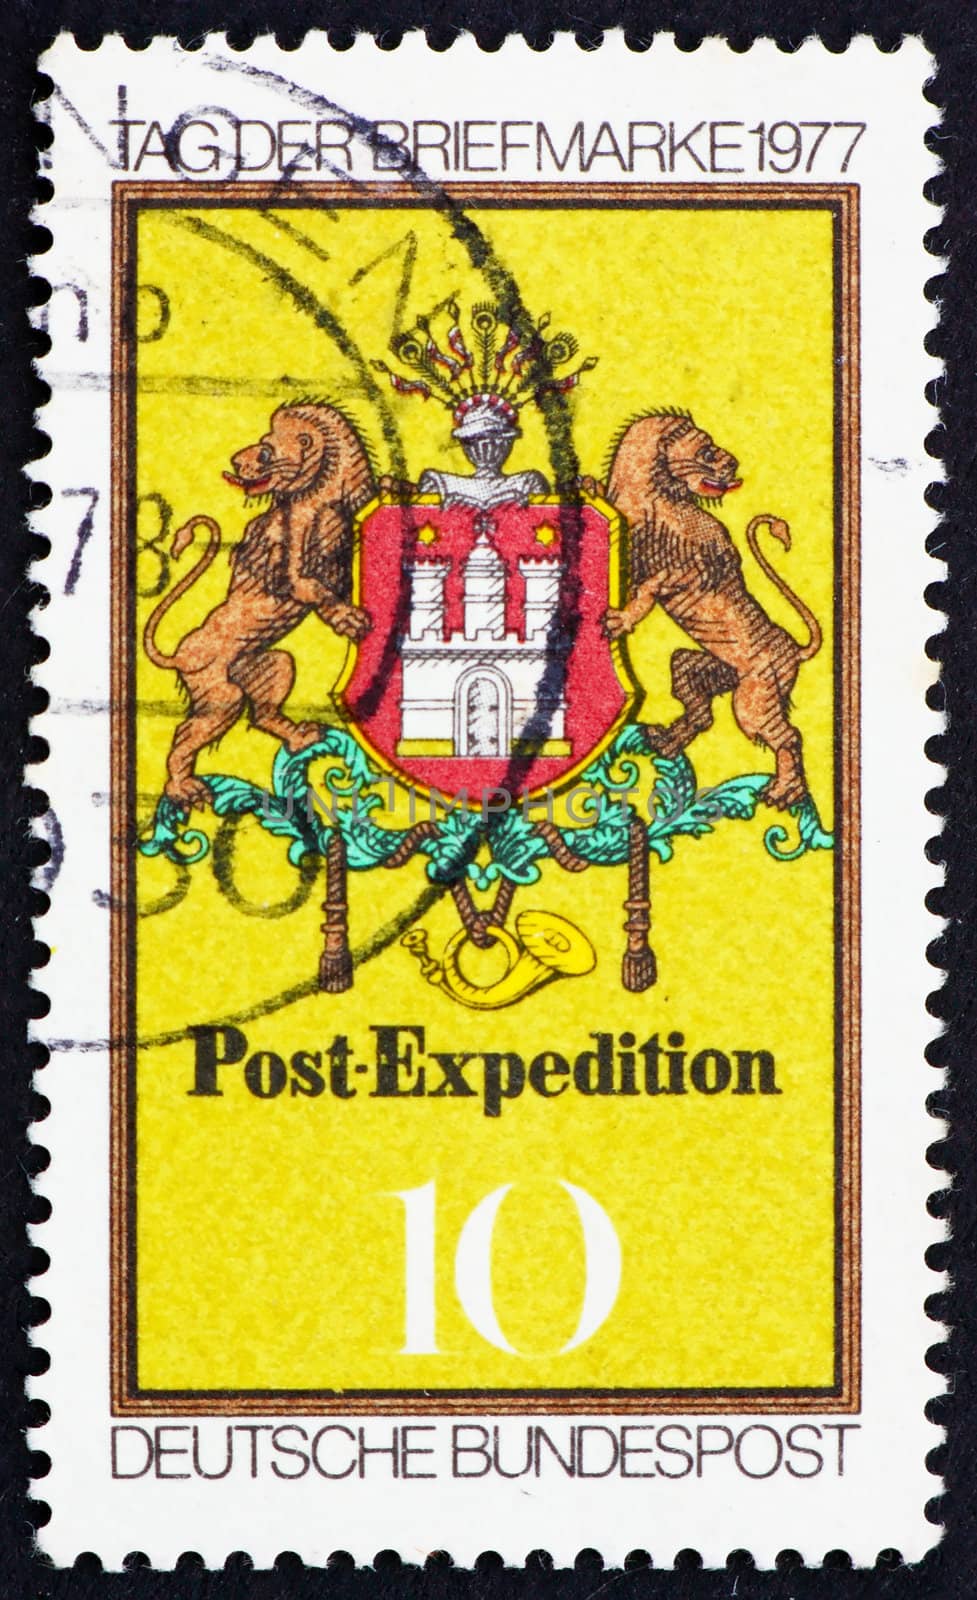 GERMANY - CIRCA 1977: a stamp printed in the Germany shows Arms of Hamburg, Post Emblem, 1861, Stamp Day, circa 1977